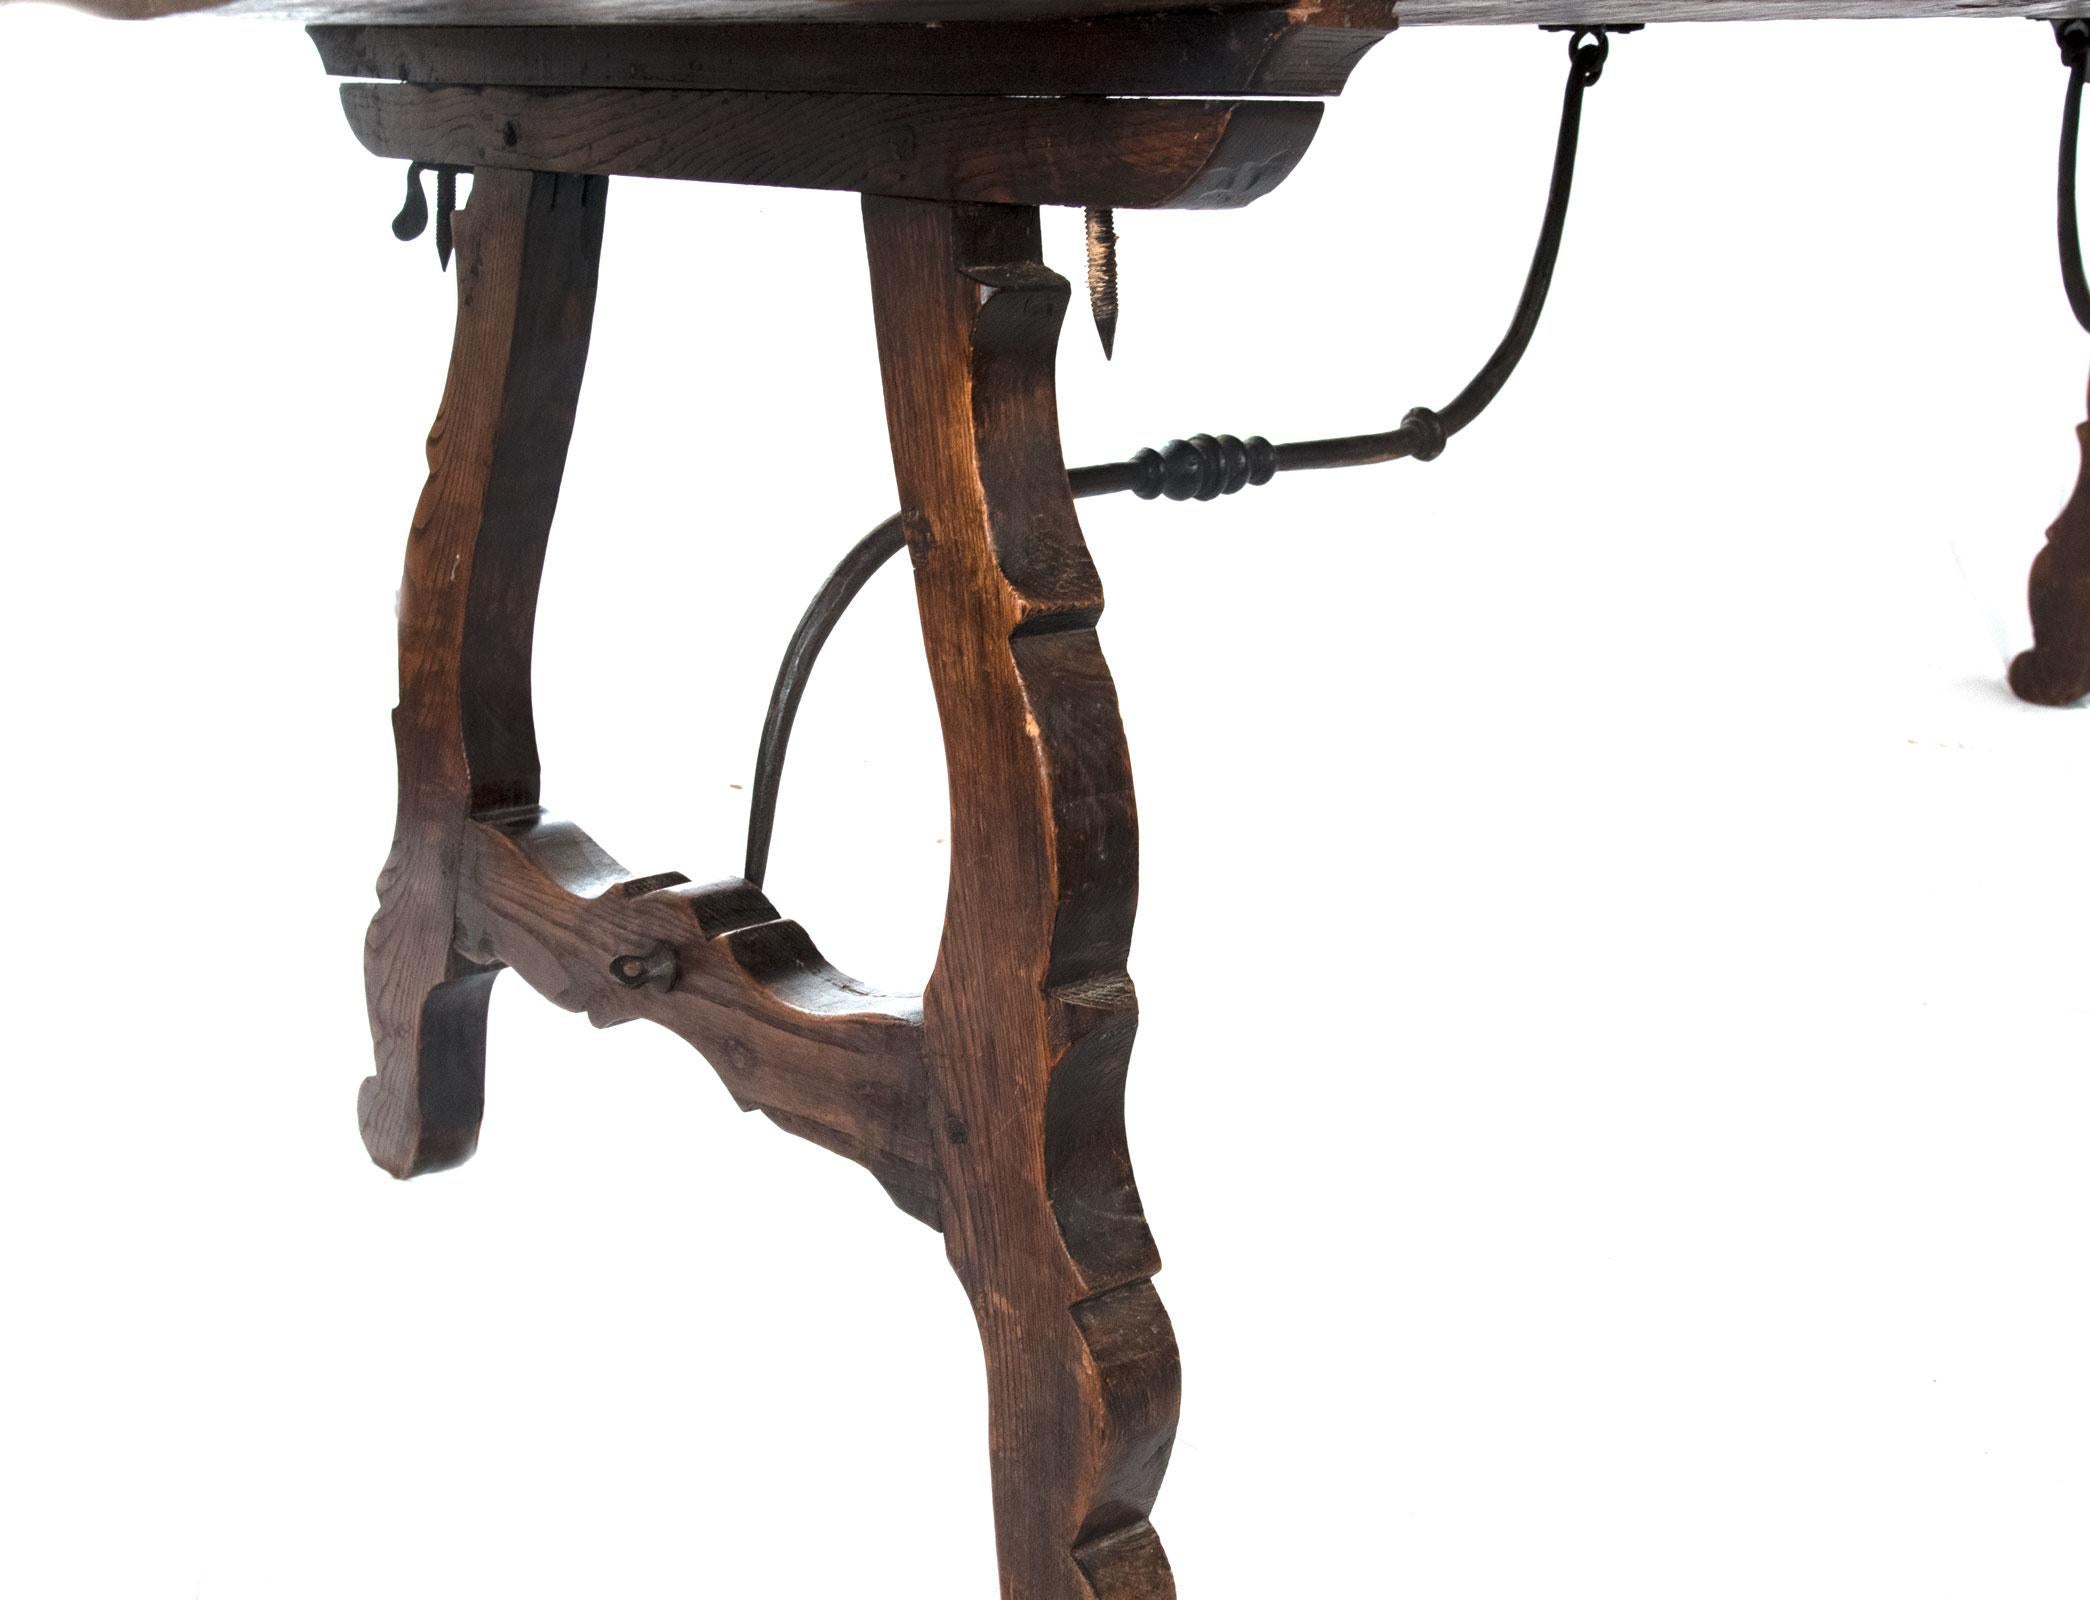 A large, tressle-form table with wrought iron support, dating from the mid-1700s.